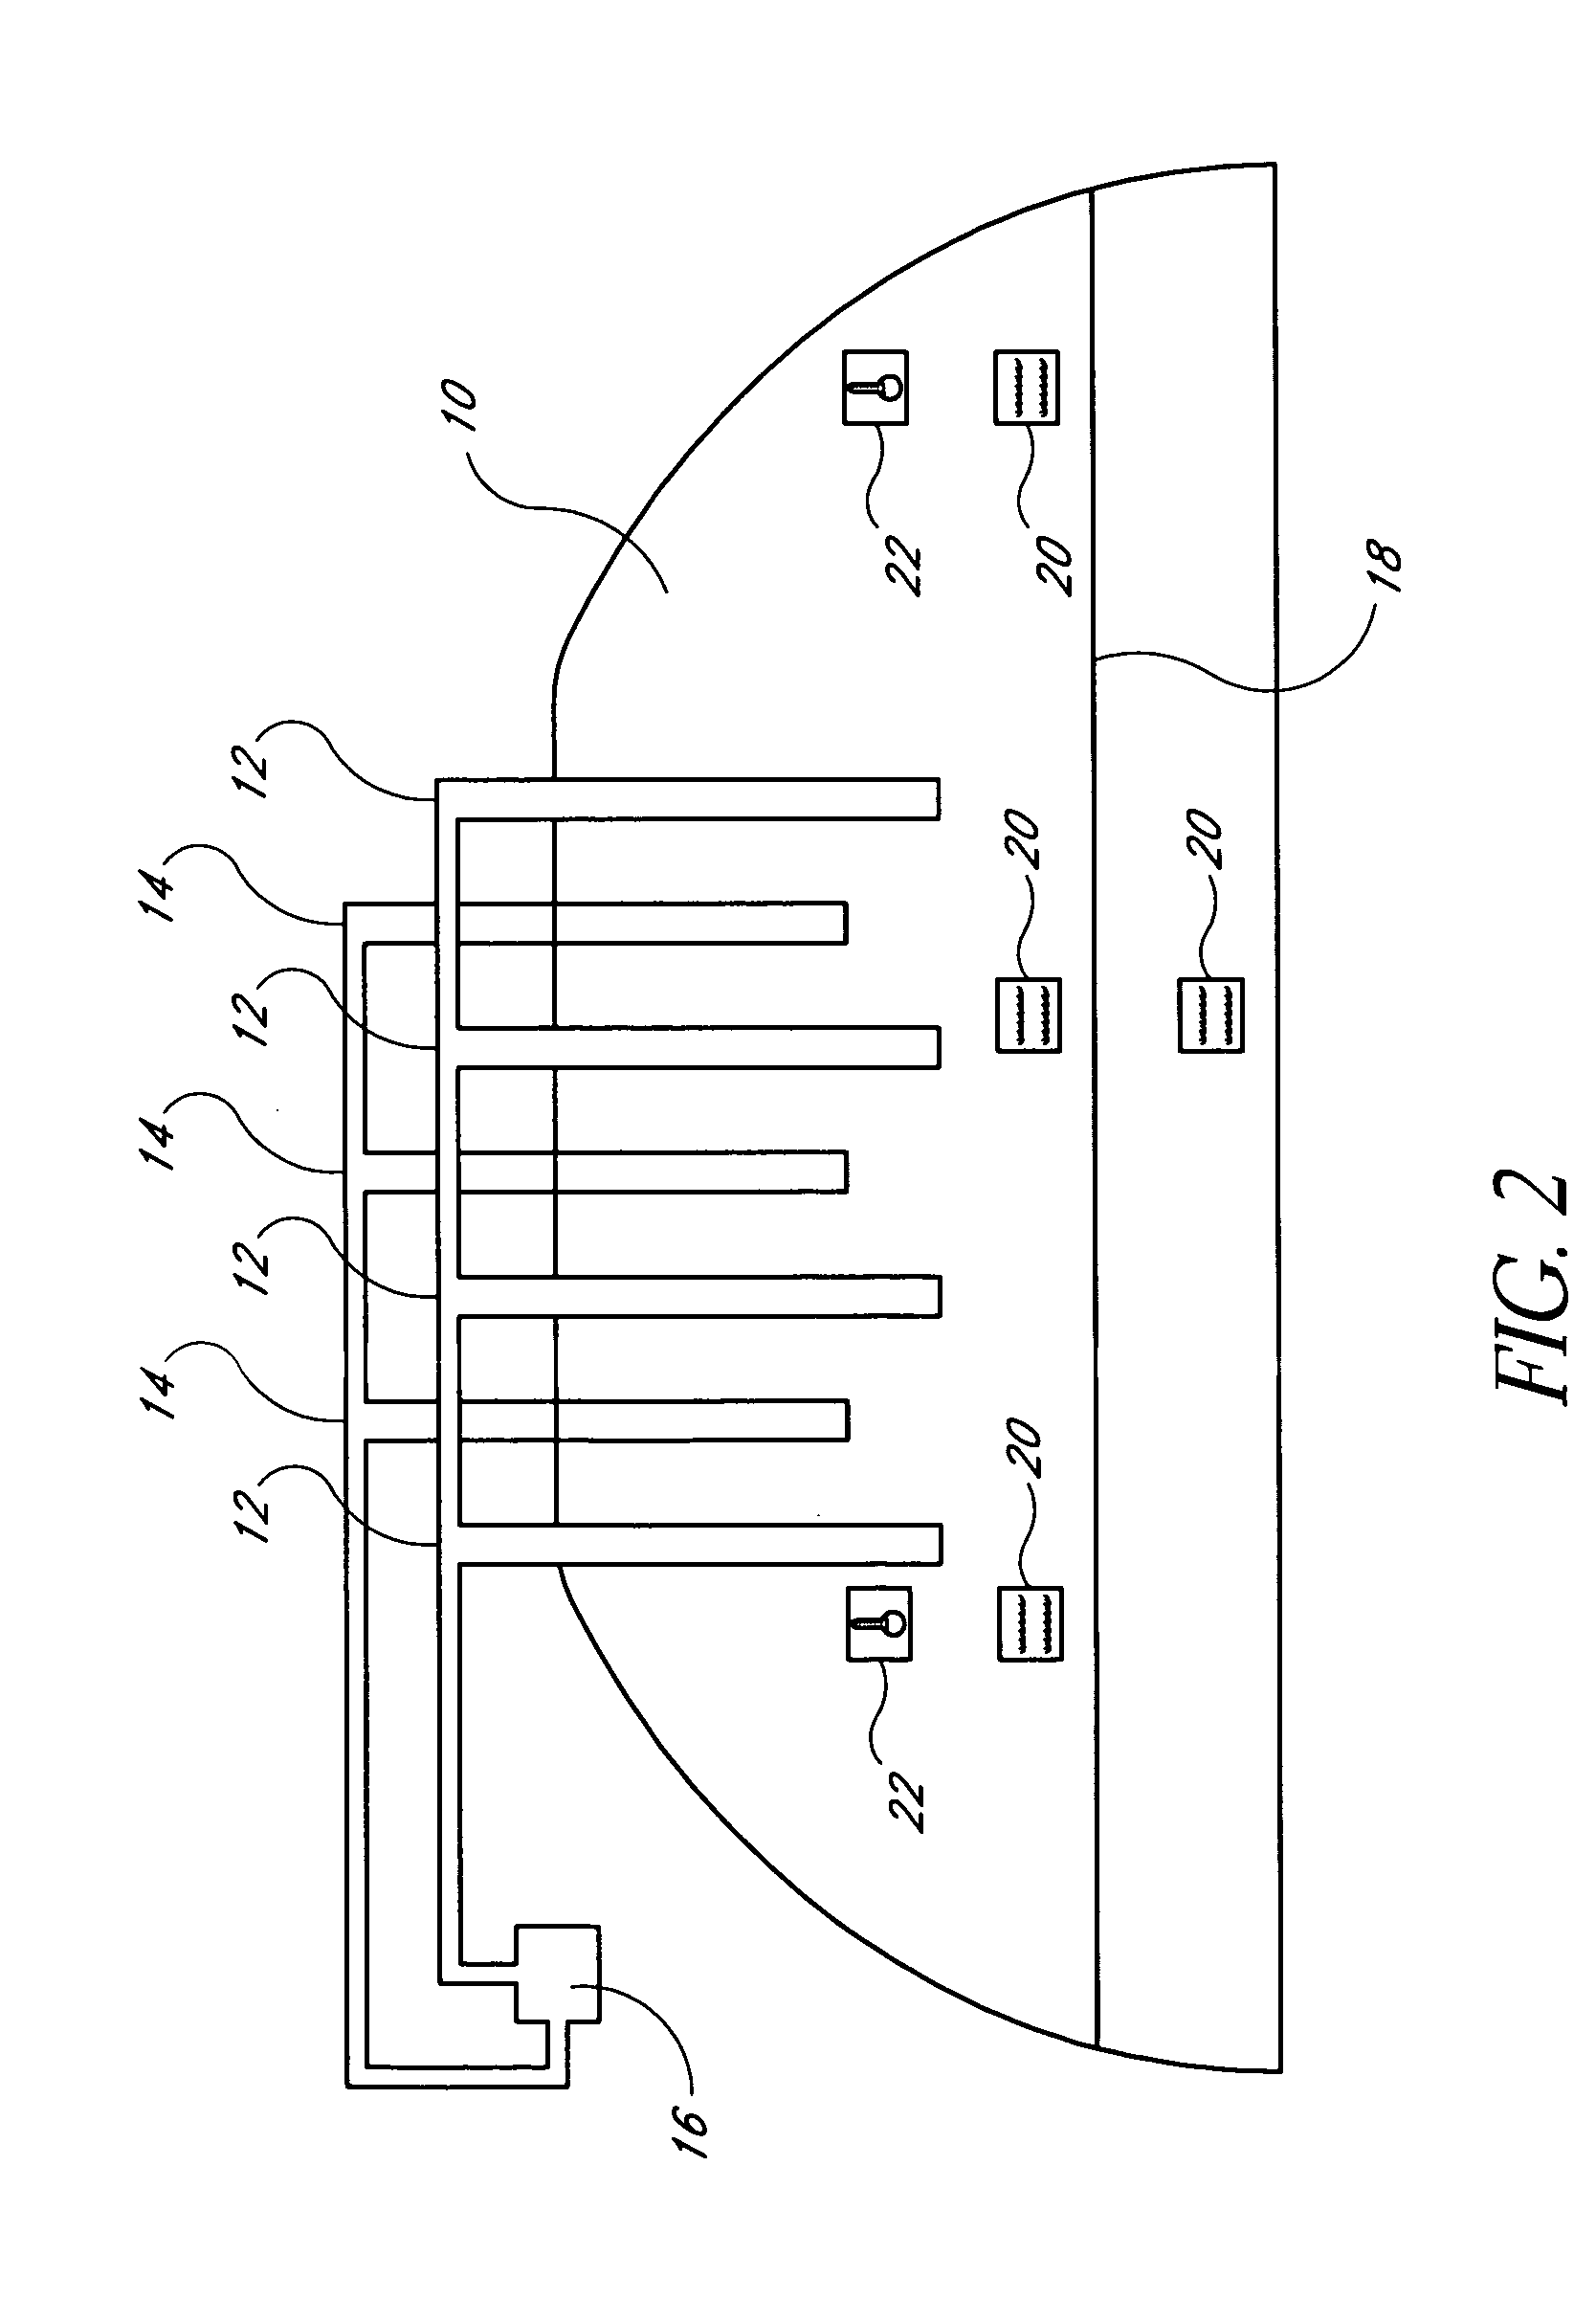 Method and apparatus for treating refuse with steam